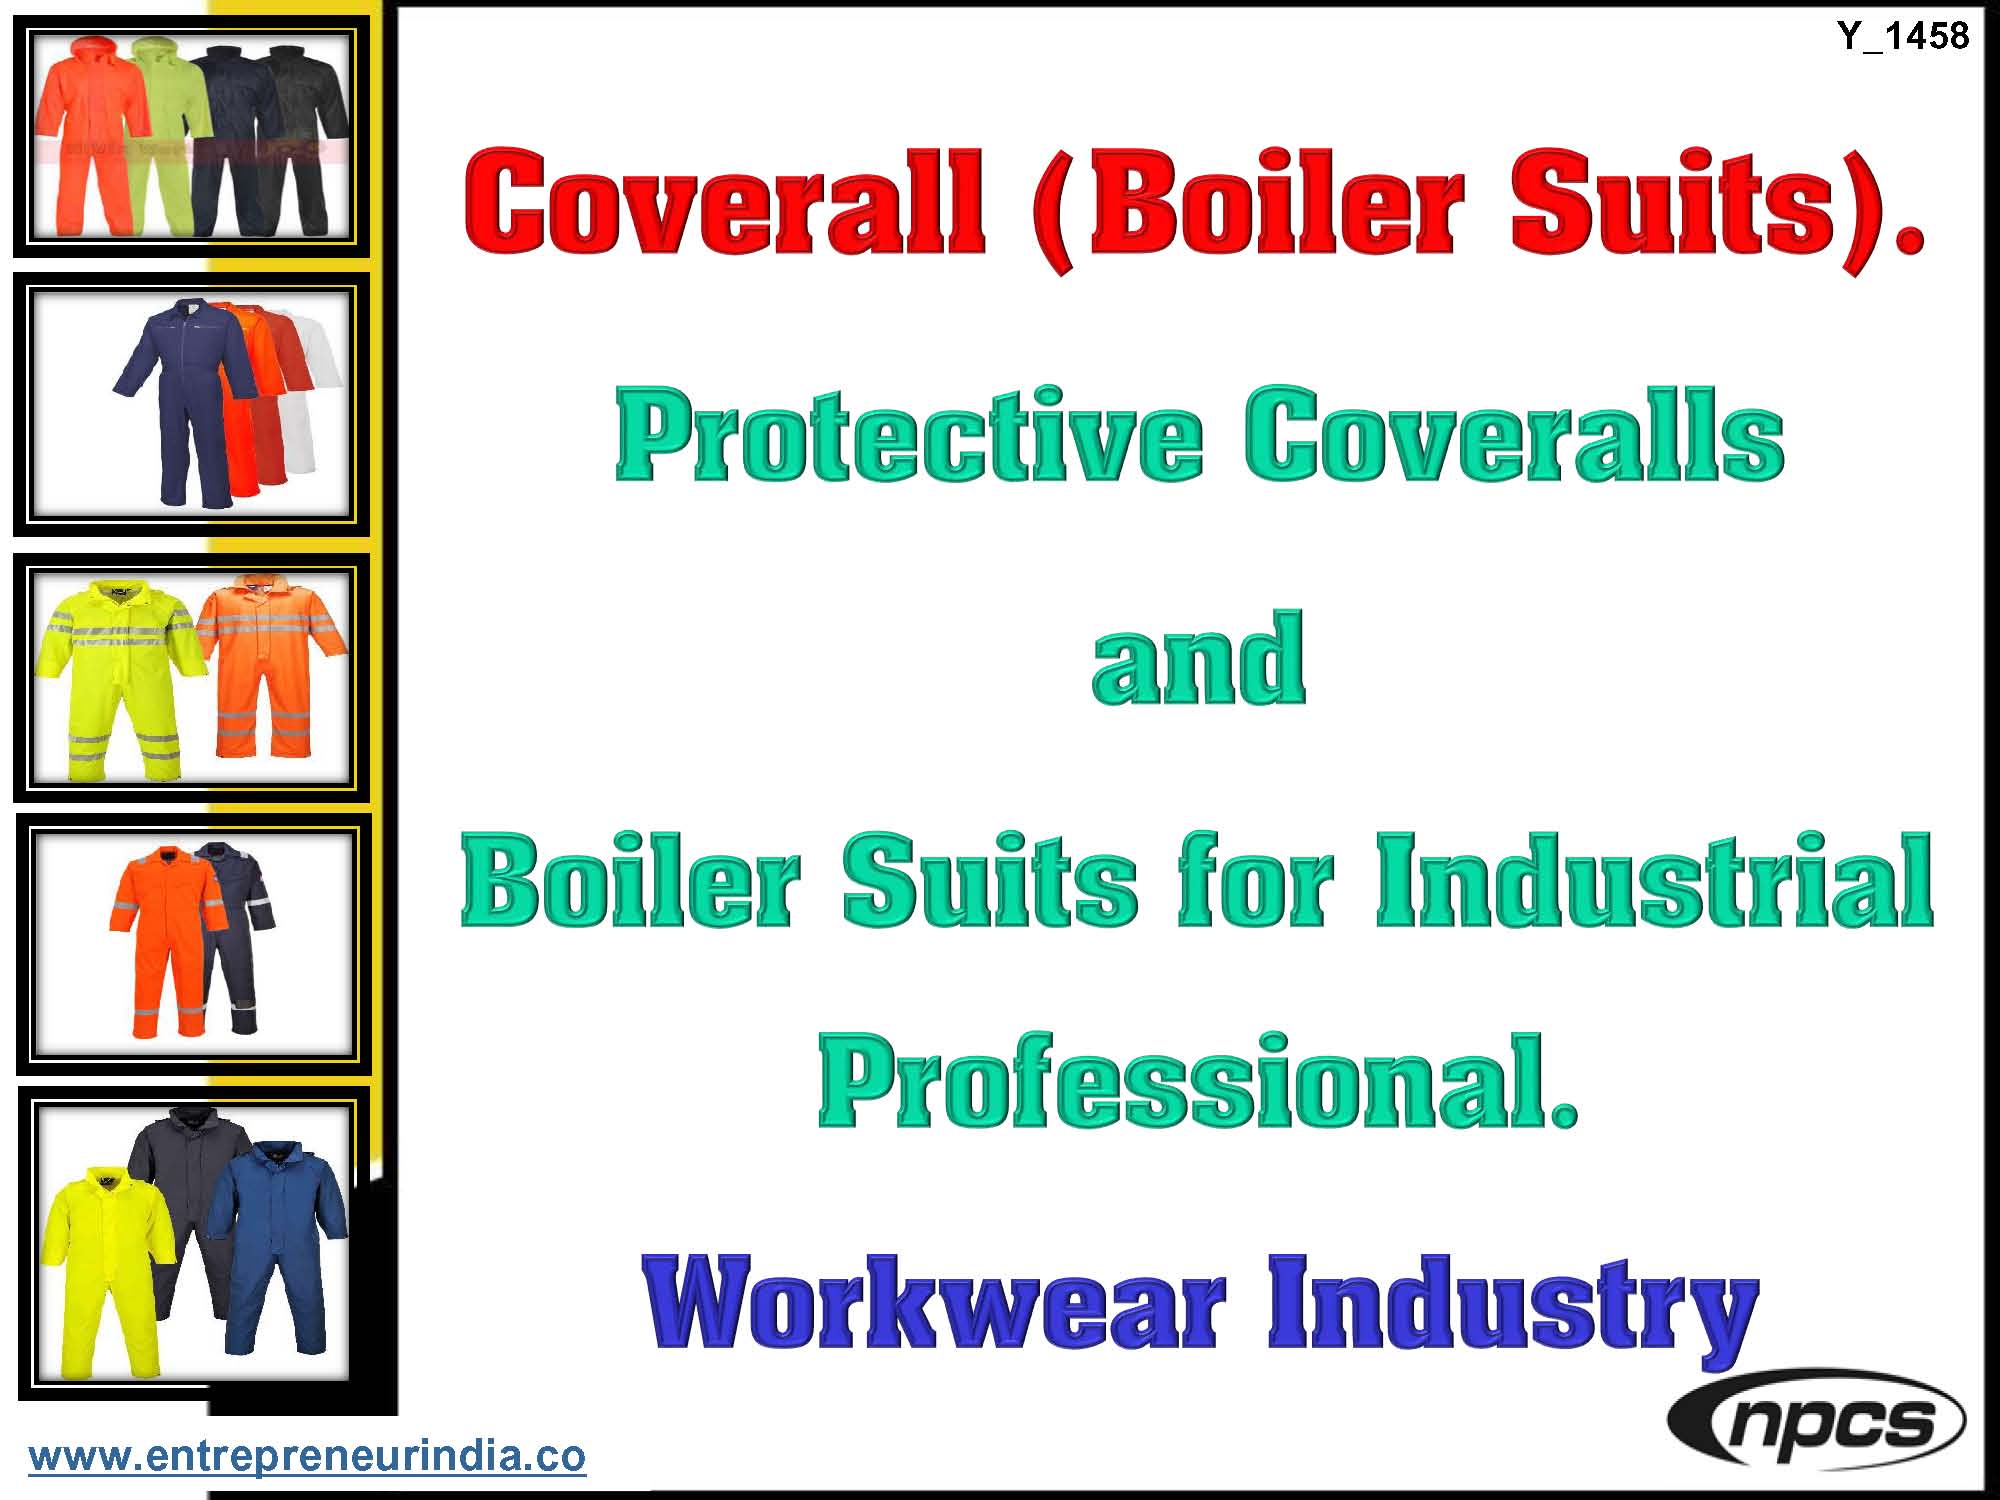 Coverall (Boiler Suits)